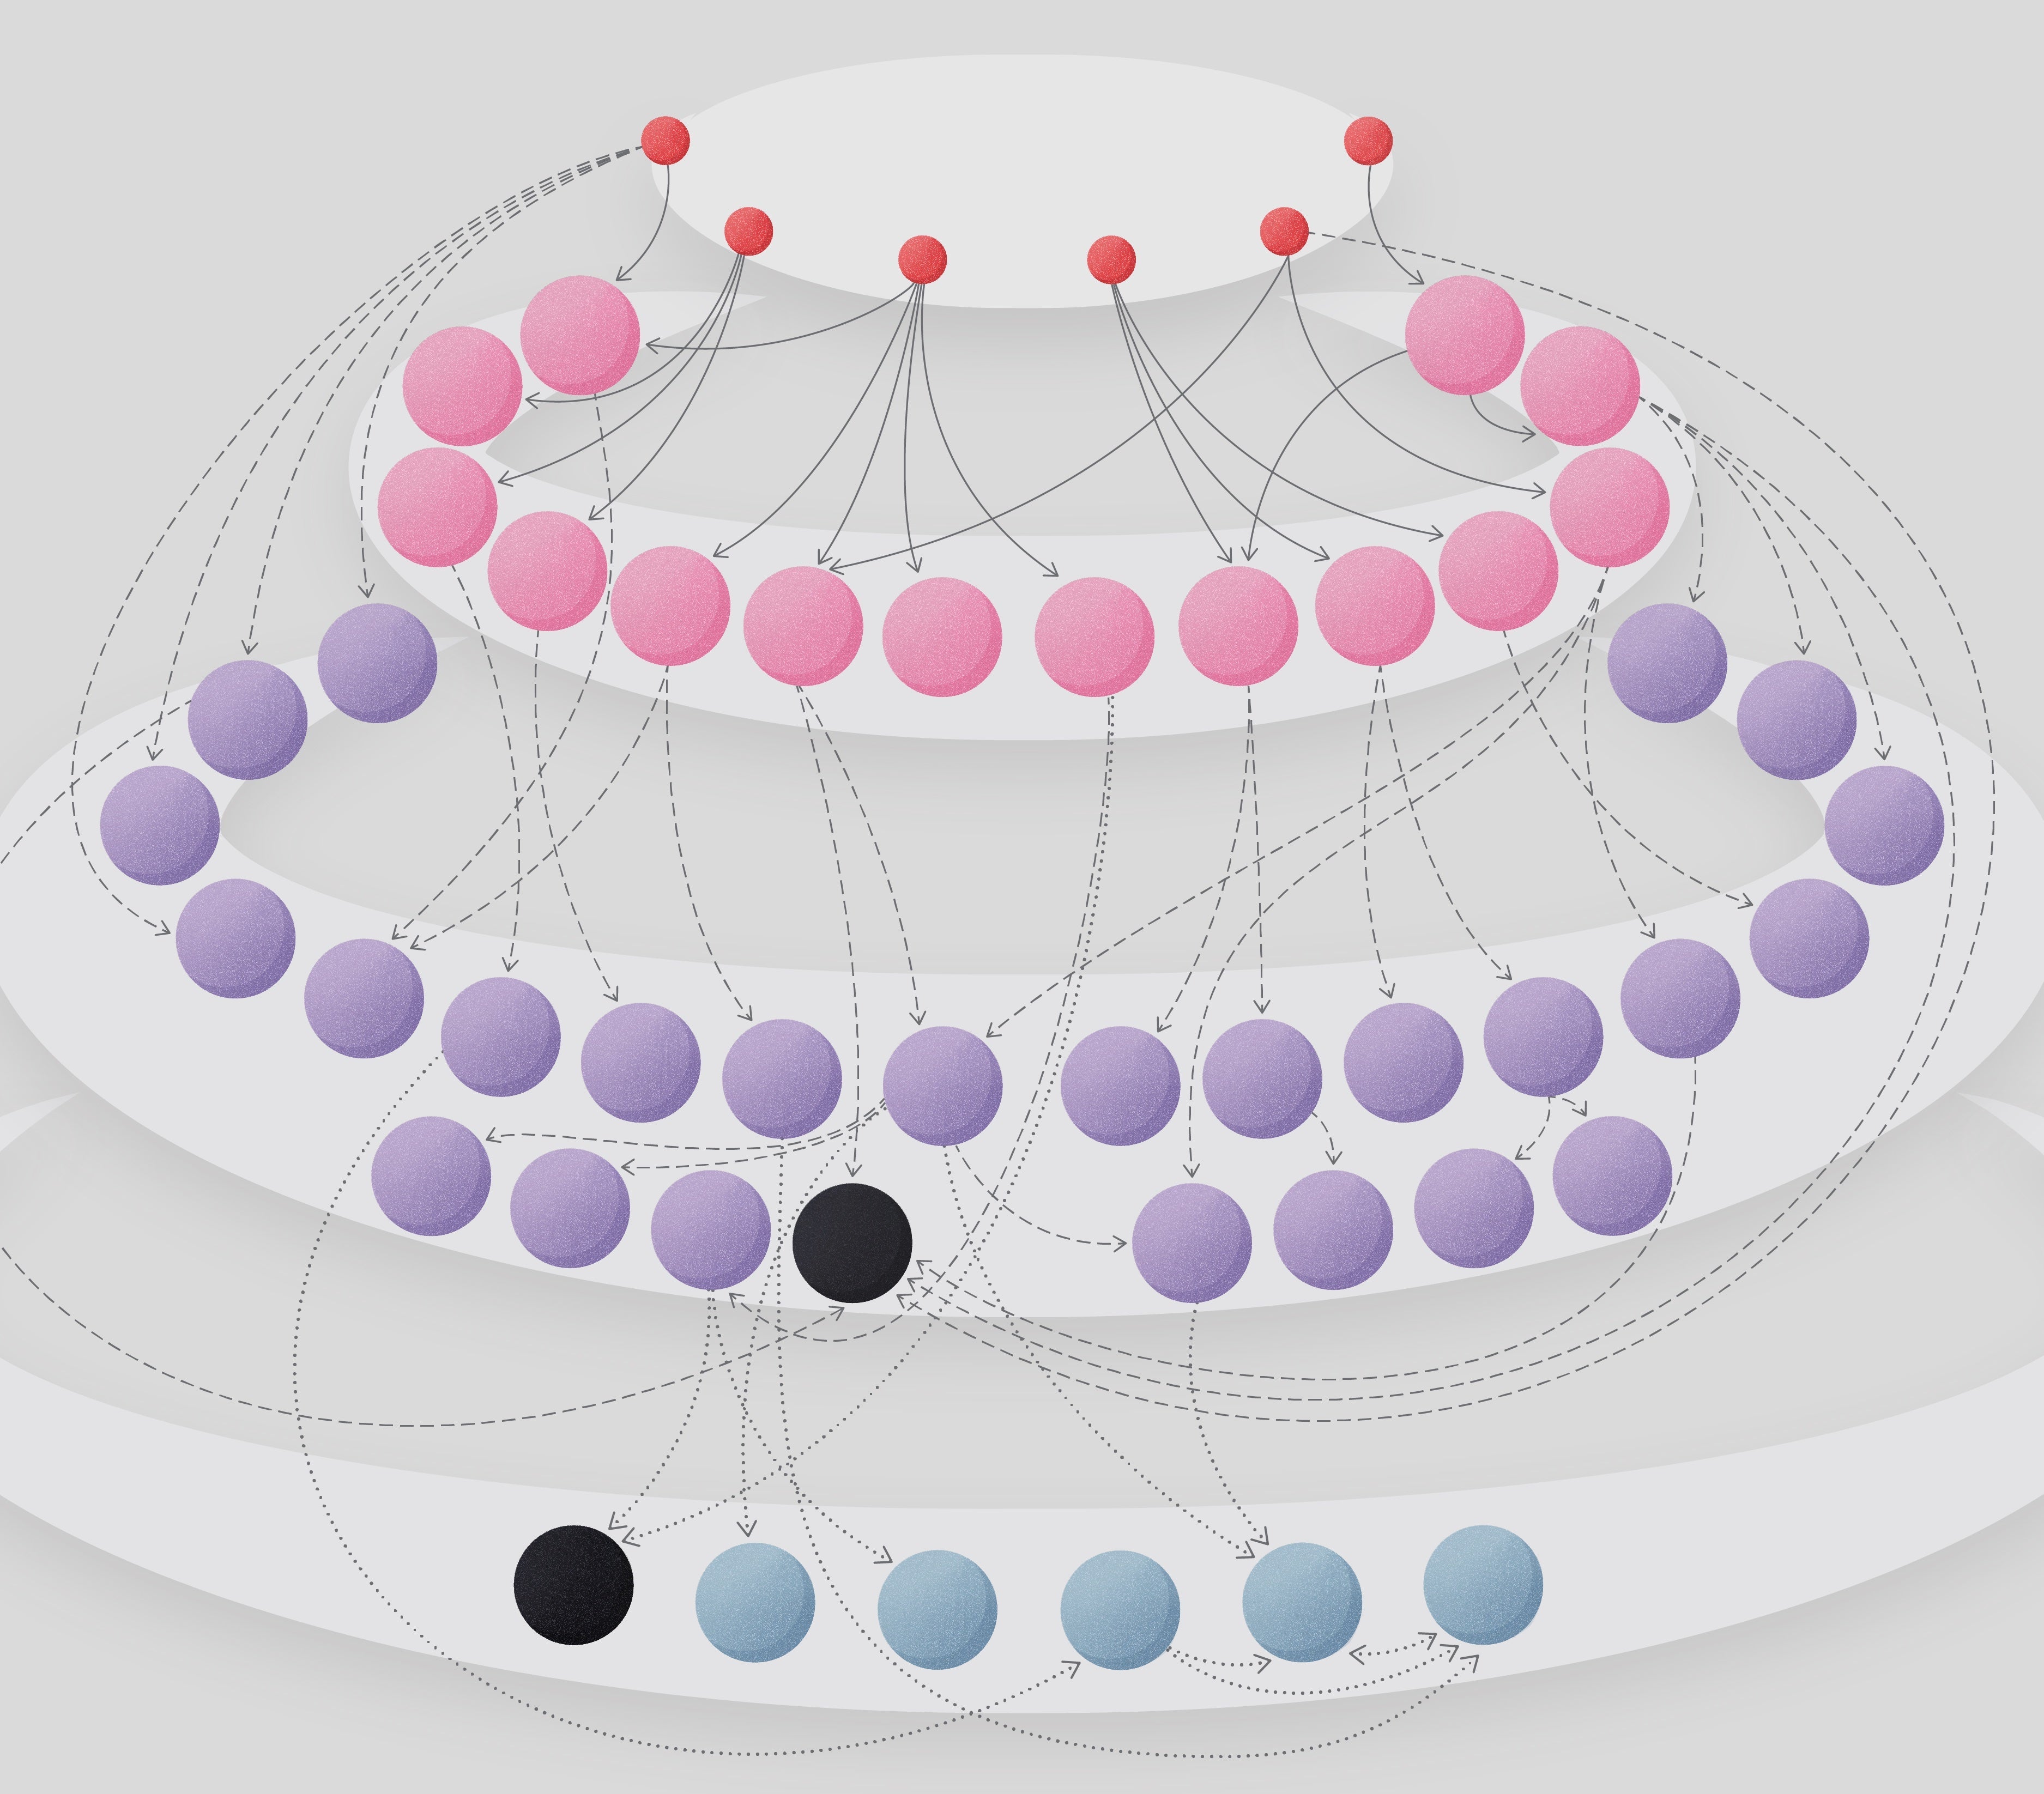 Illustration includes 4 tiers, connected by a web of arrows. Top tier includes 6 red spheres. Next tier includes 14 pink spheres. Third tier includes 26 spheres. Bottom tier includes 6 spheres.